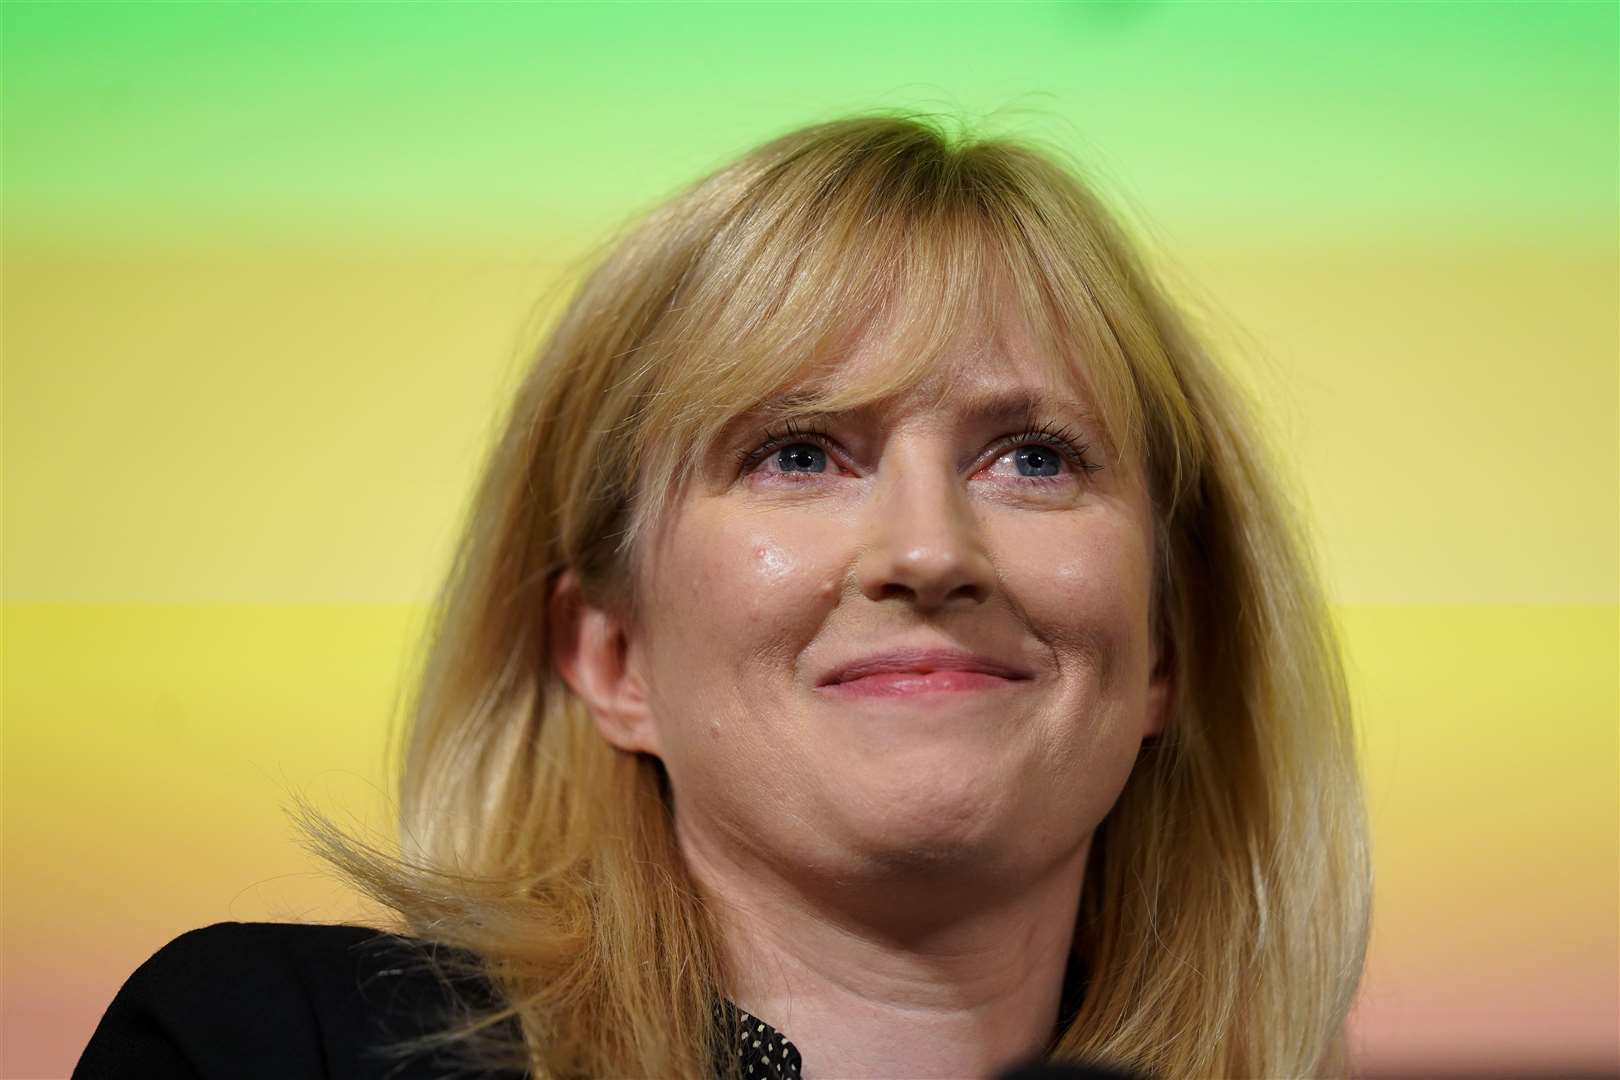 Labour’s Rosie Duffield has faced allegations of transphobia over her defence of women-only spaces (Kirsty O’Connor/PA)